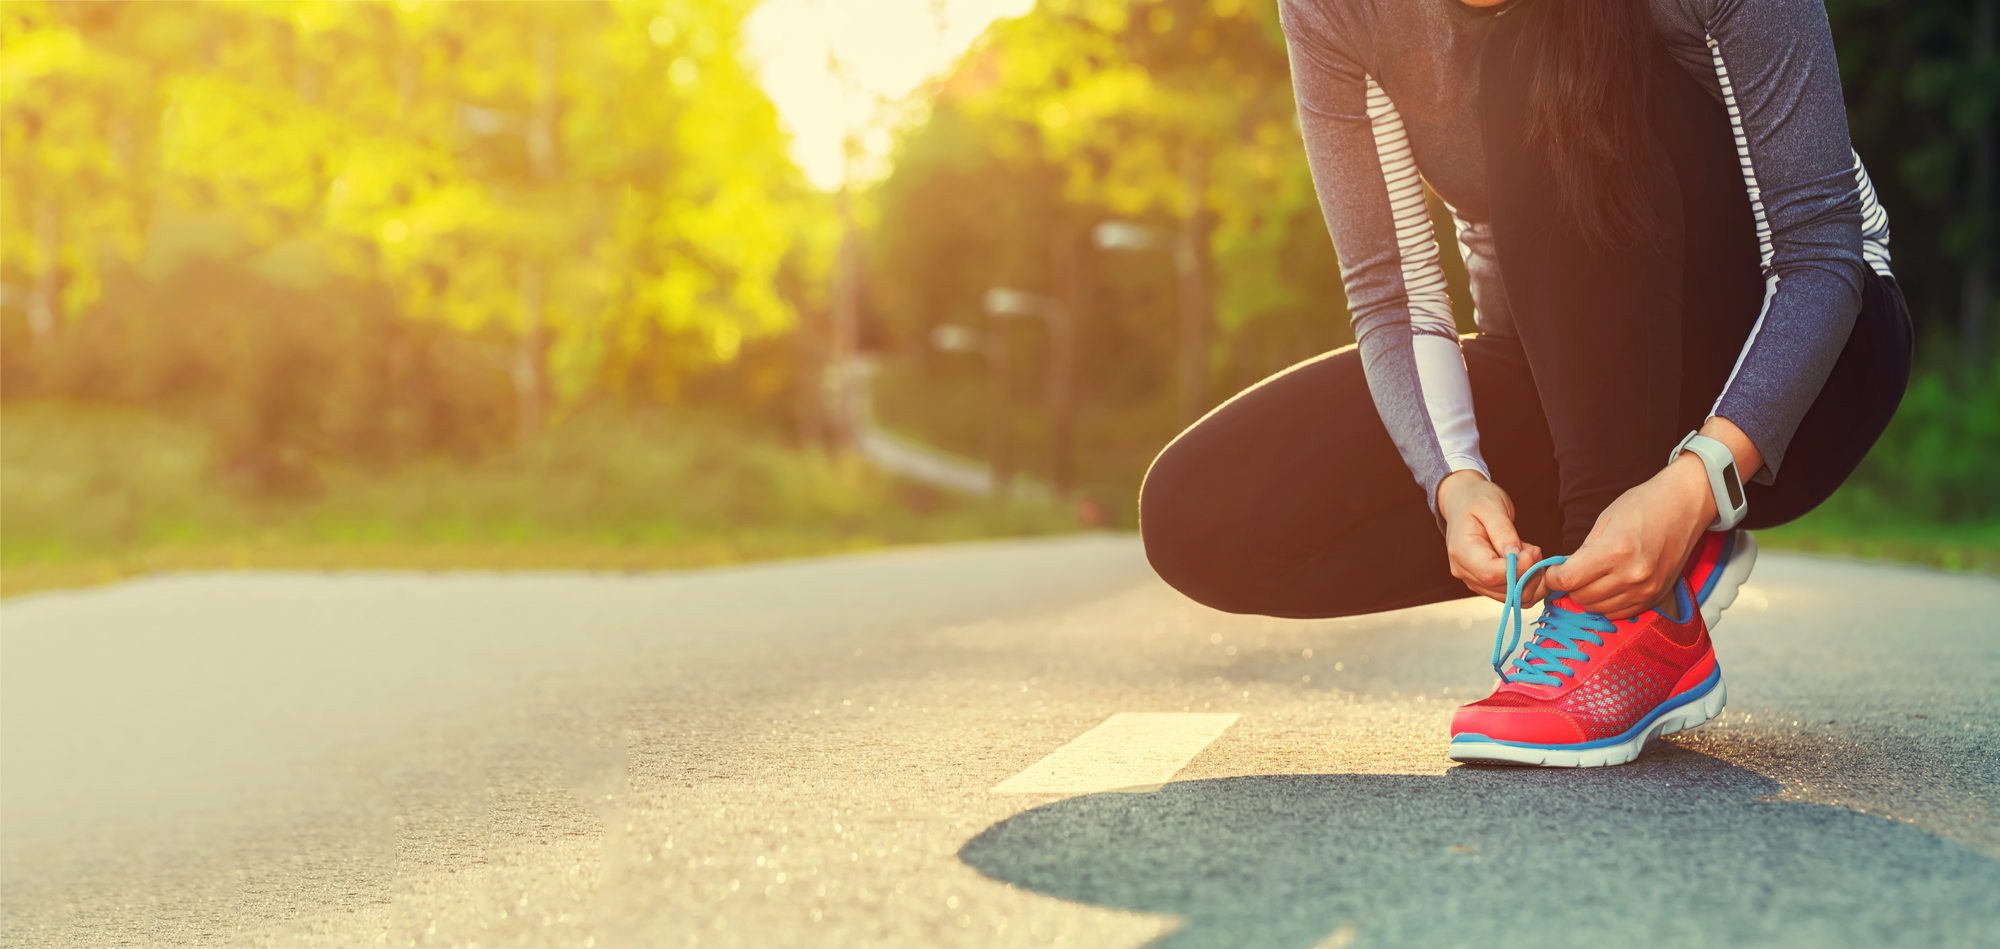  Ashtead Podiatry: Take Life In Your Stride   Read More  